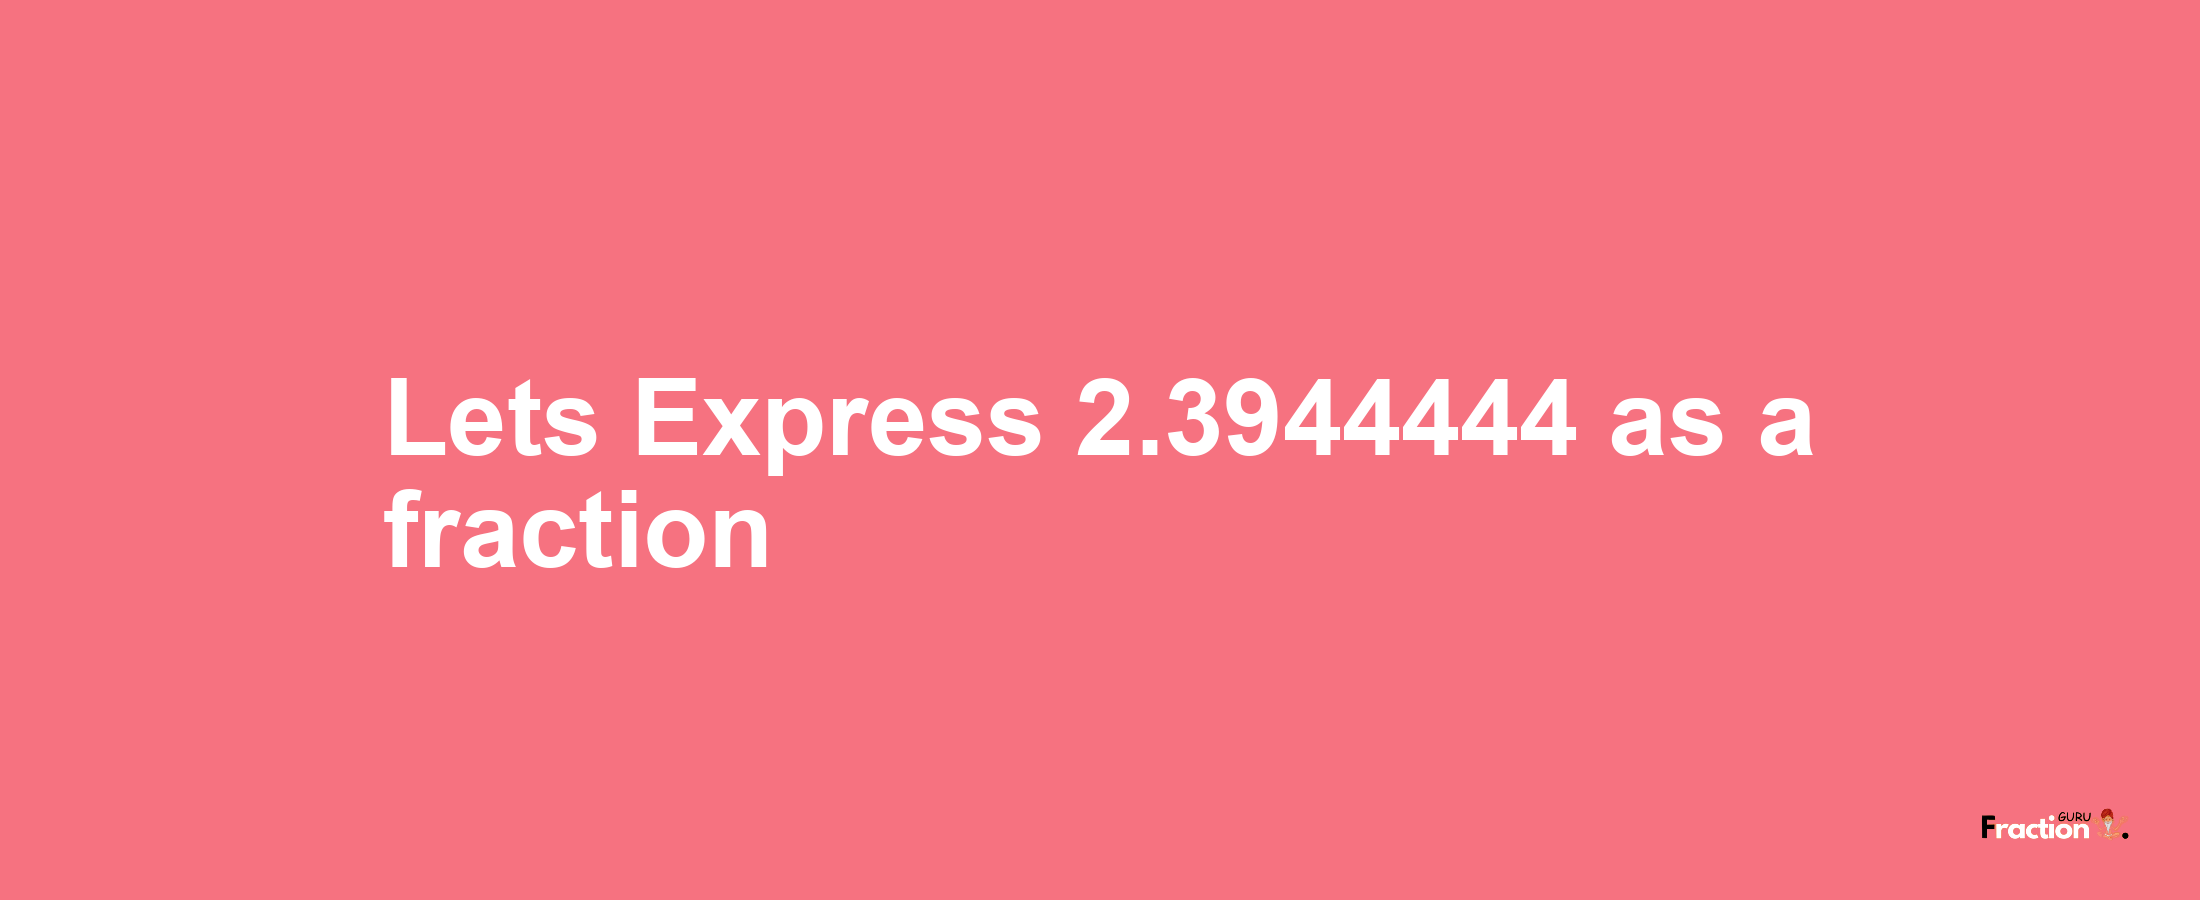 Lets Express 2.3944444 as afraction